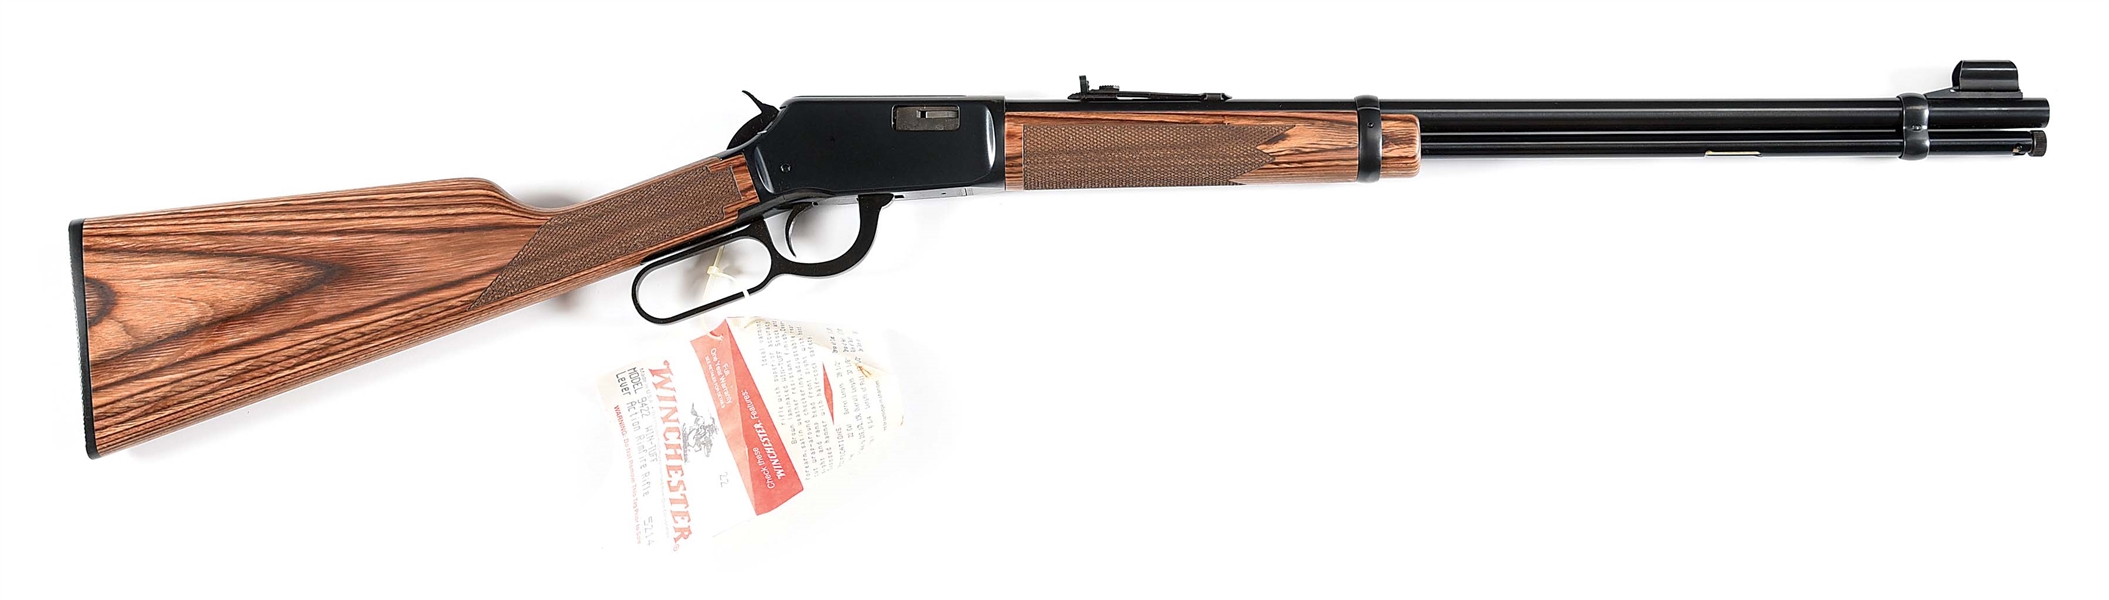 (M) WINCHESTER 9422 LEVER ACTION RIFLE.